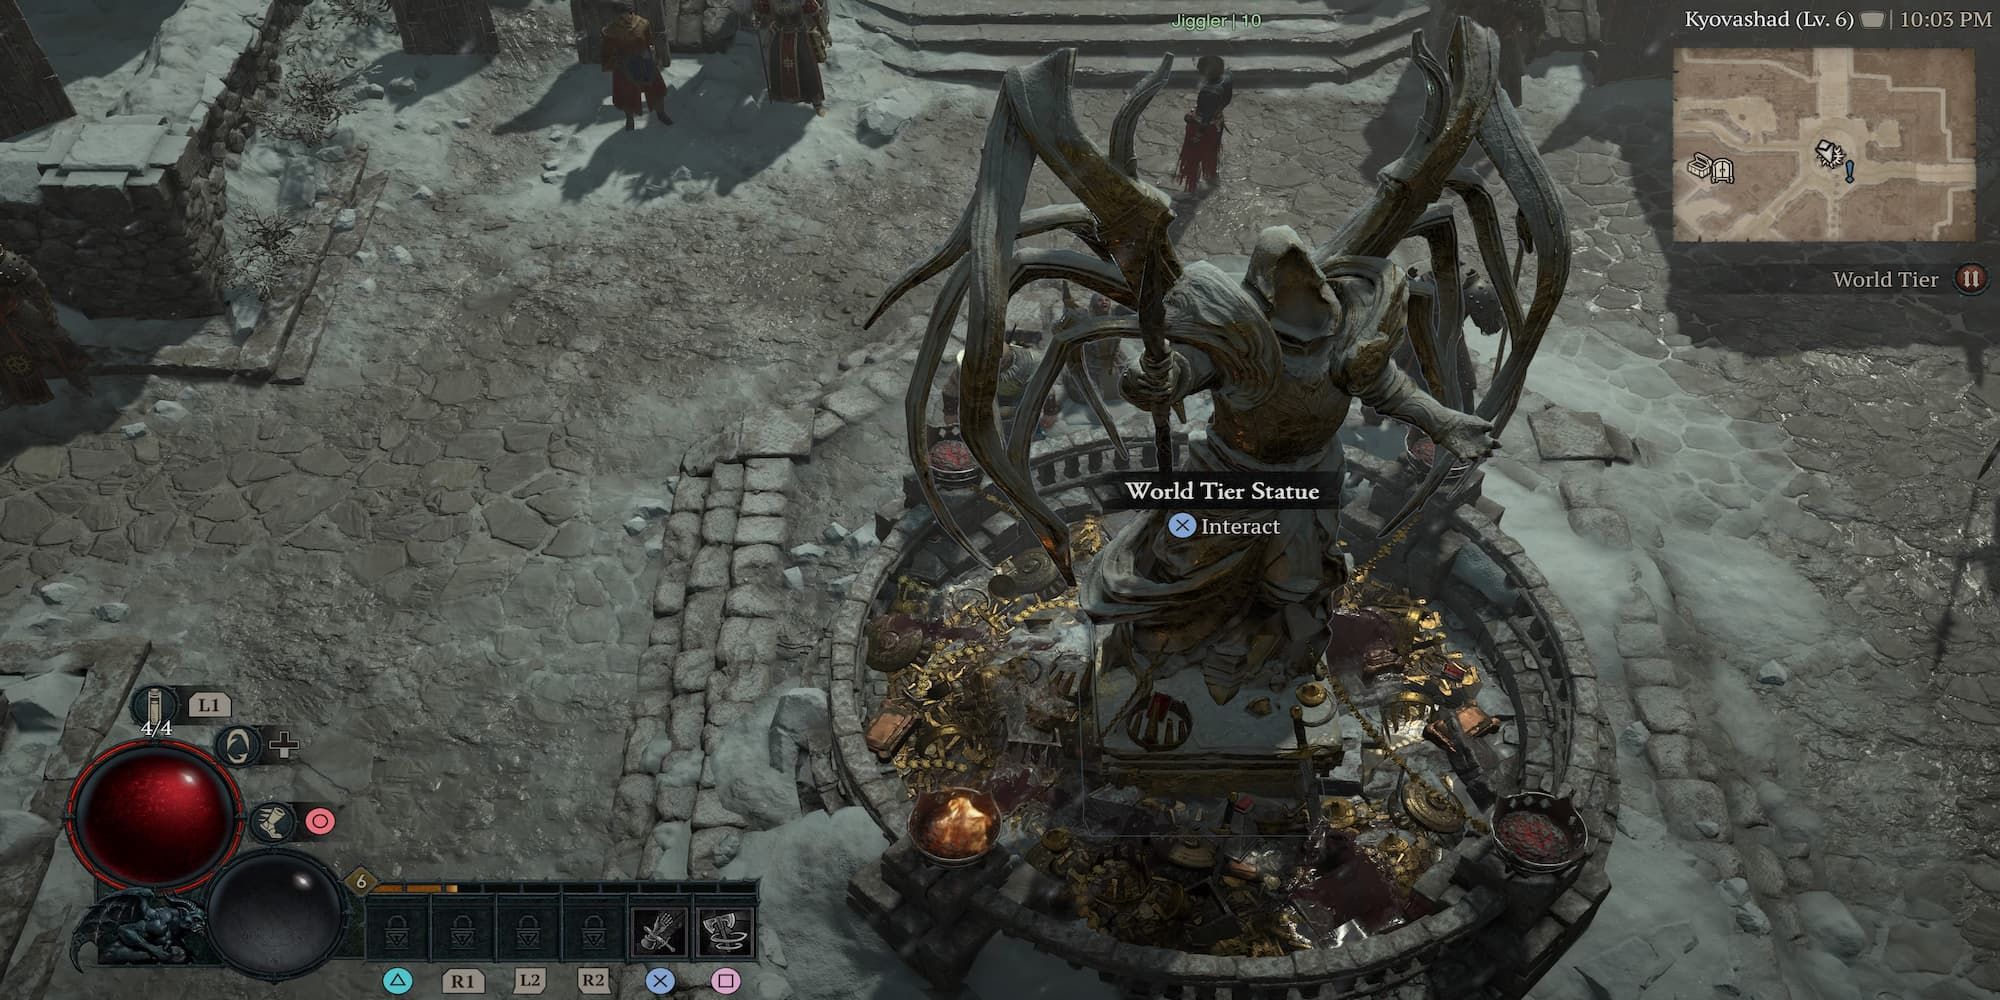 Player About To Interact With A World Tier Statue 